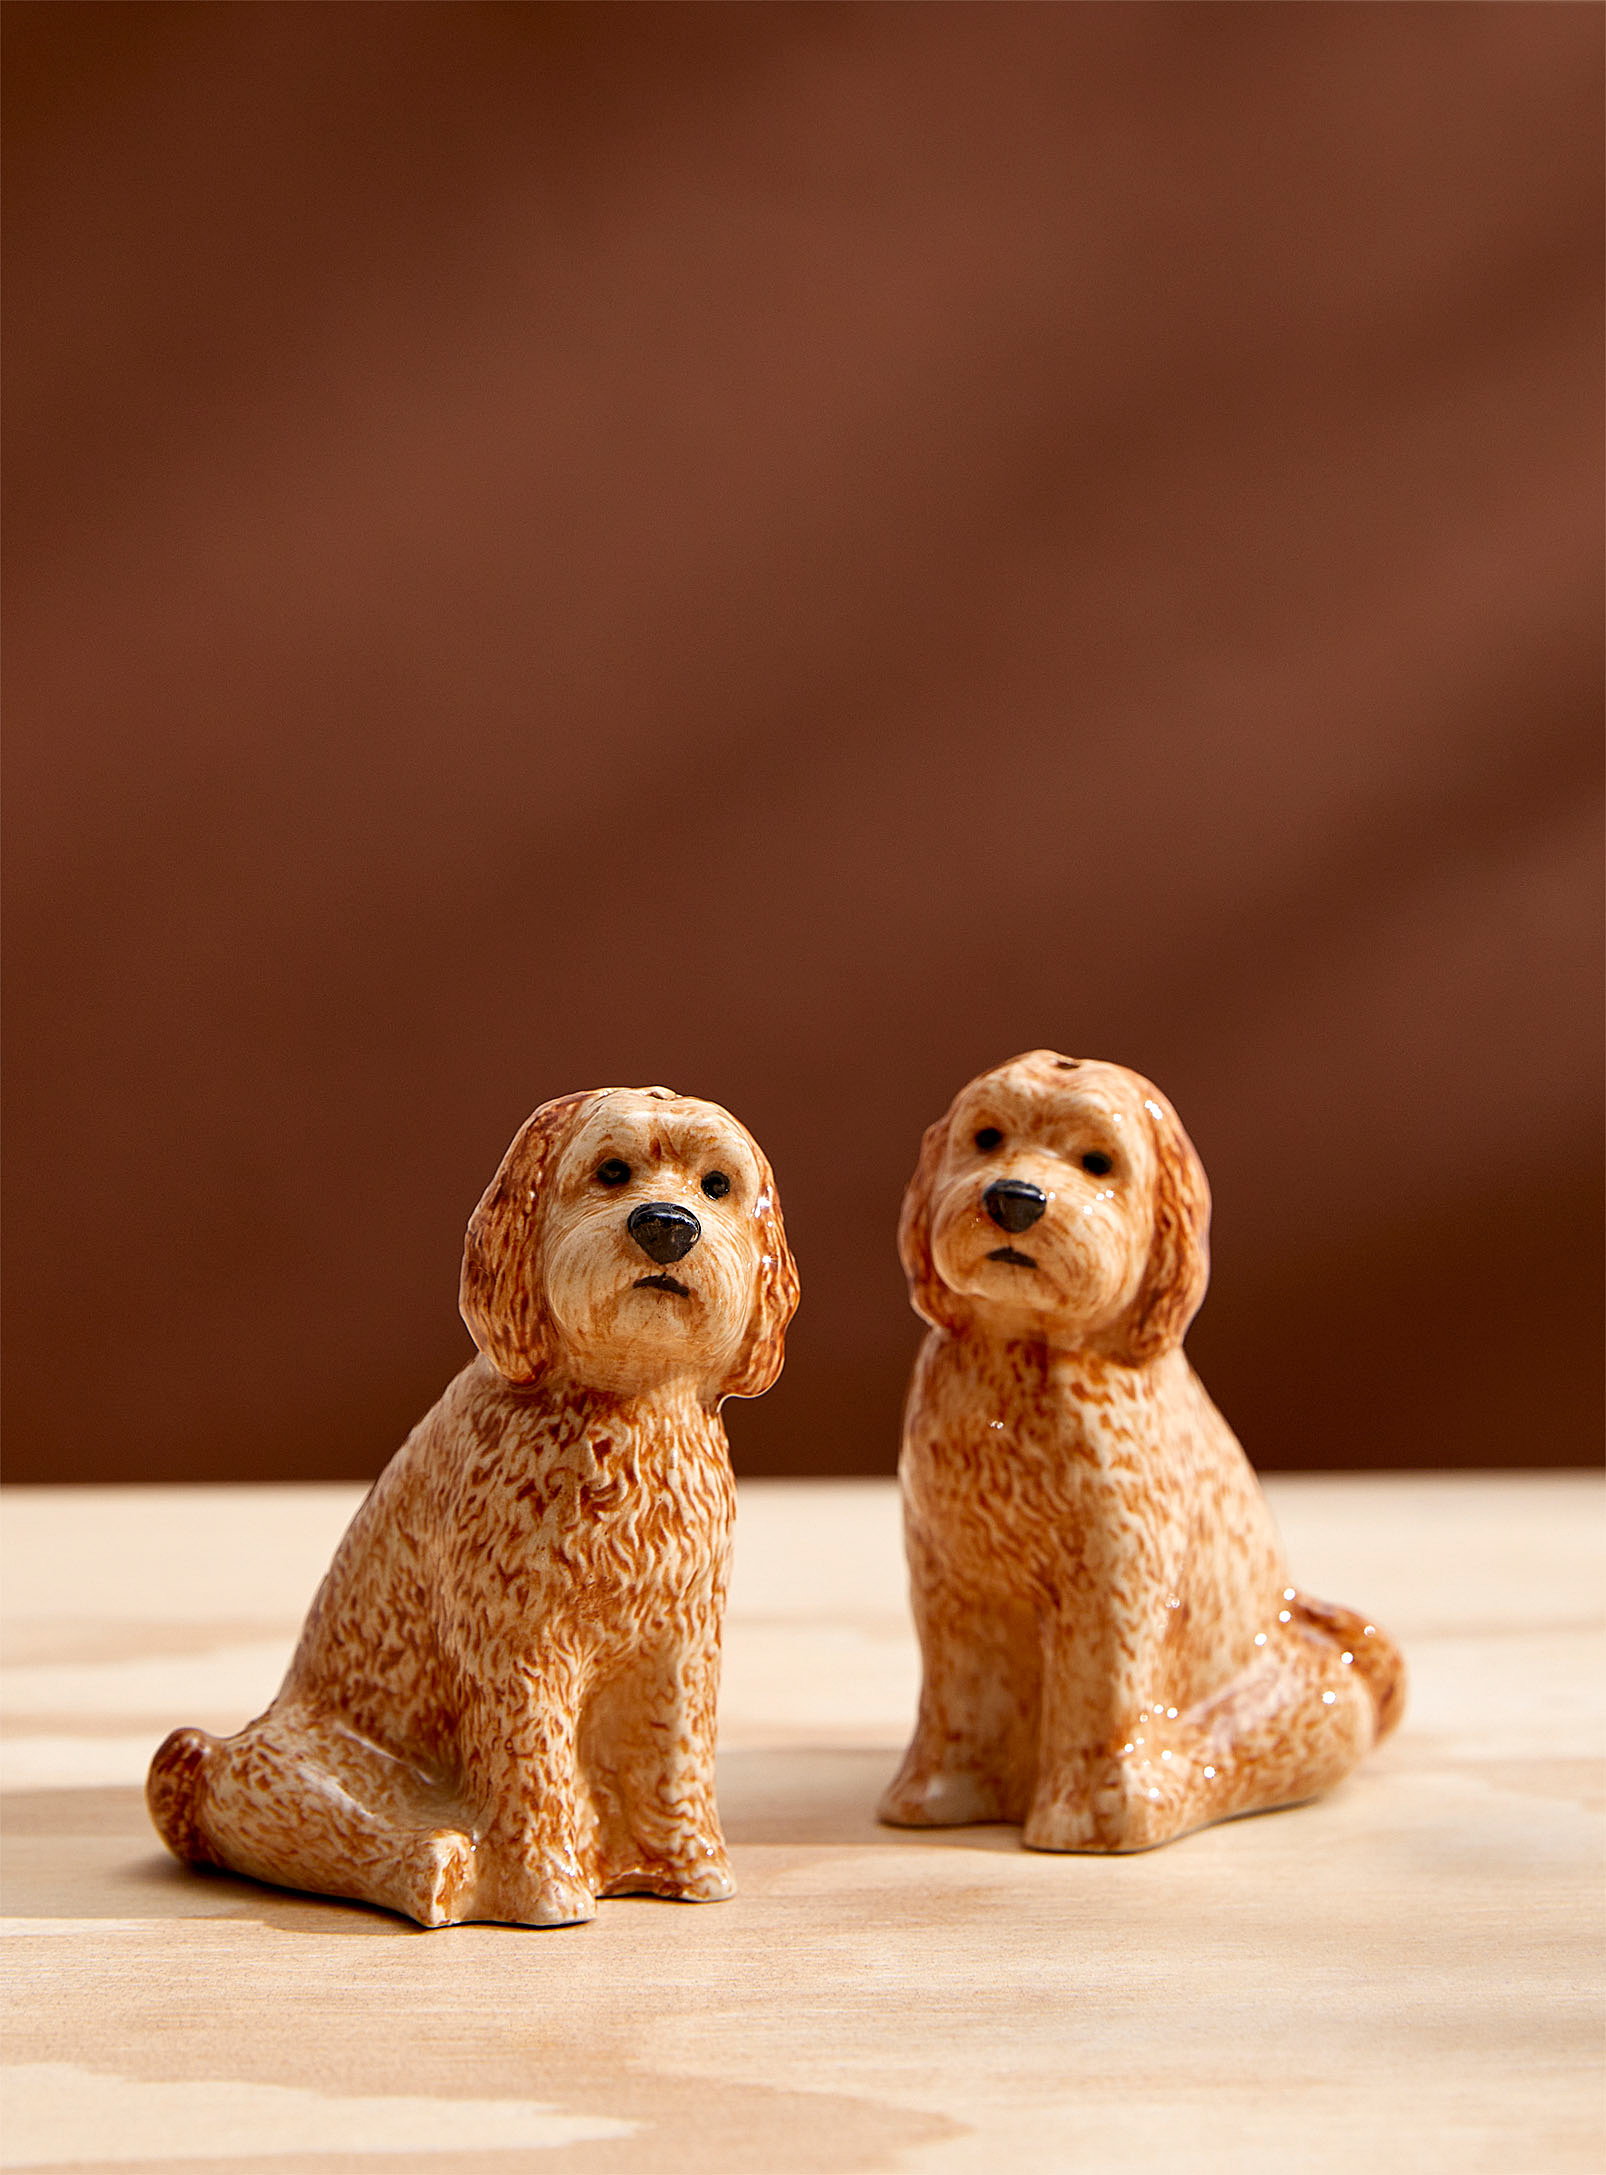 Quail Cockapoo Dogs Salt And Pepper Shaker Set In Brown